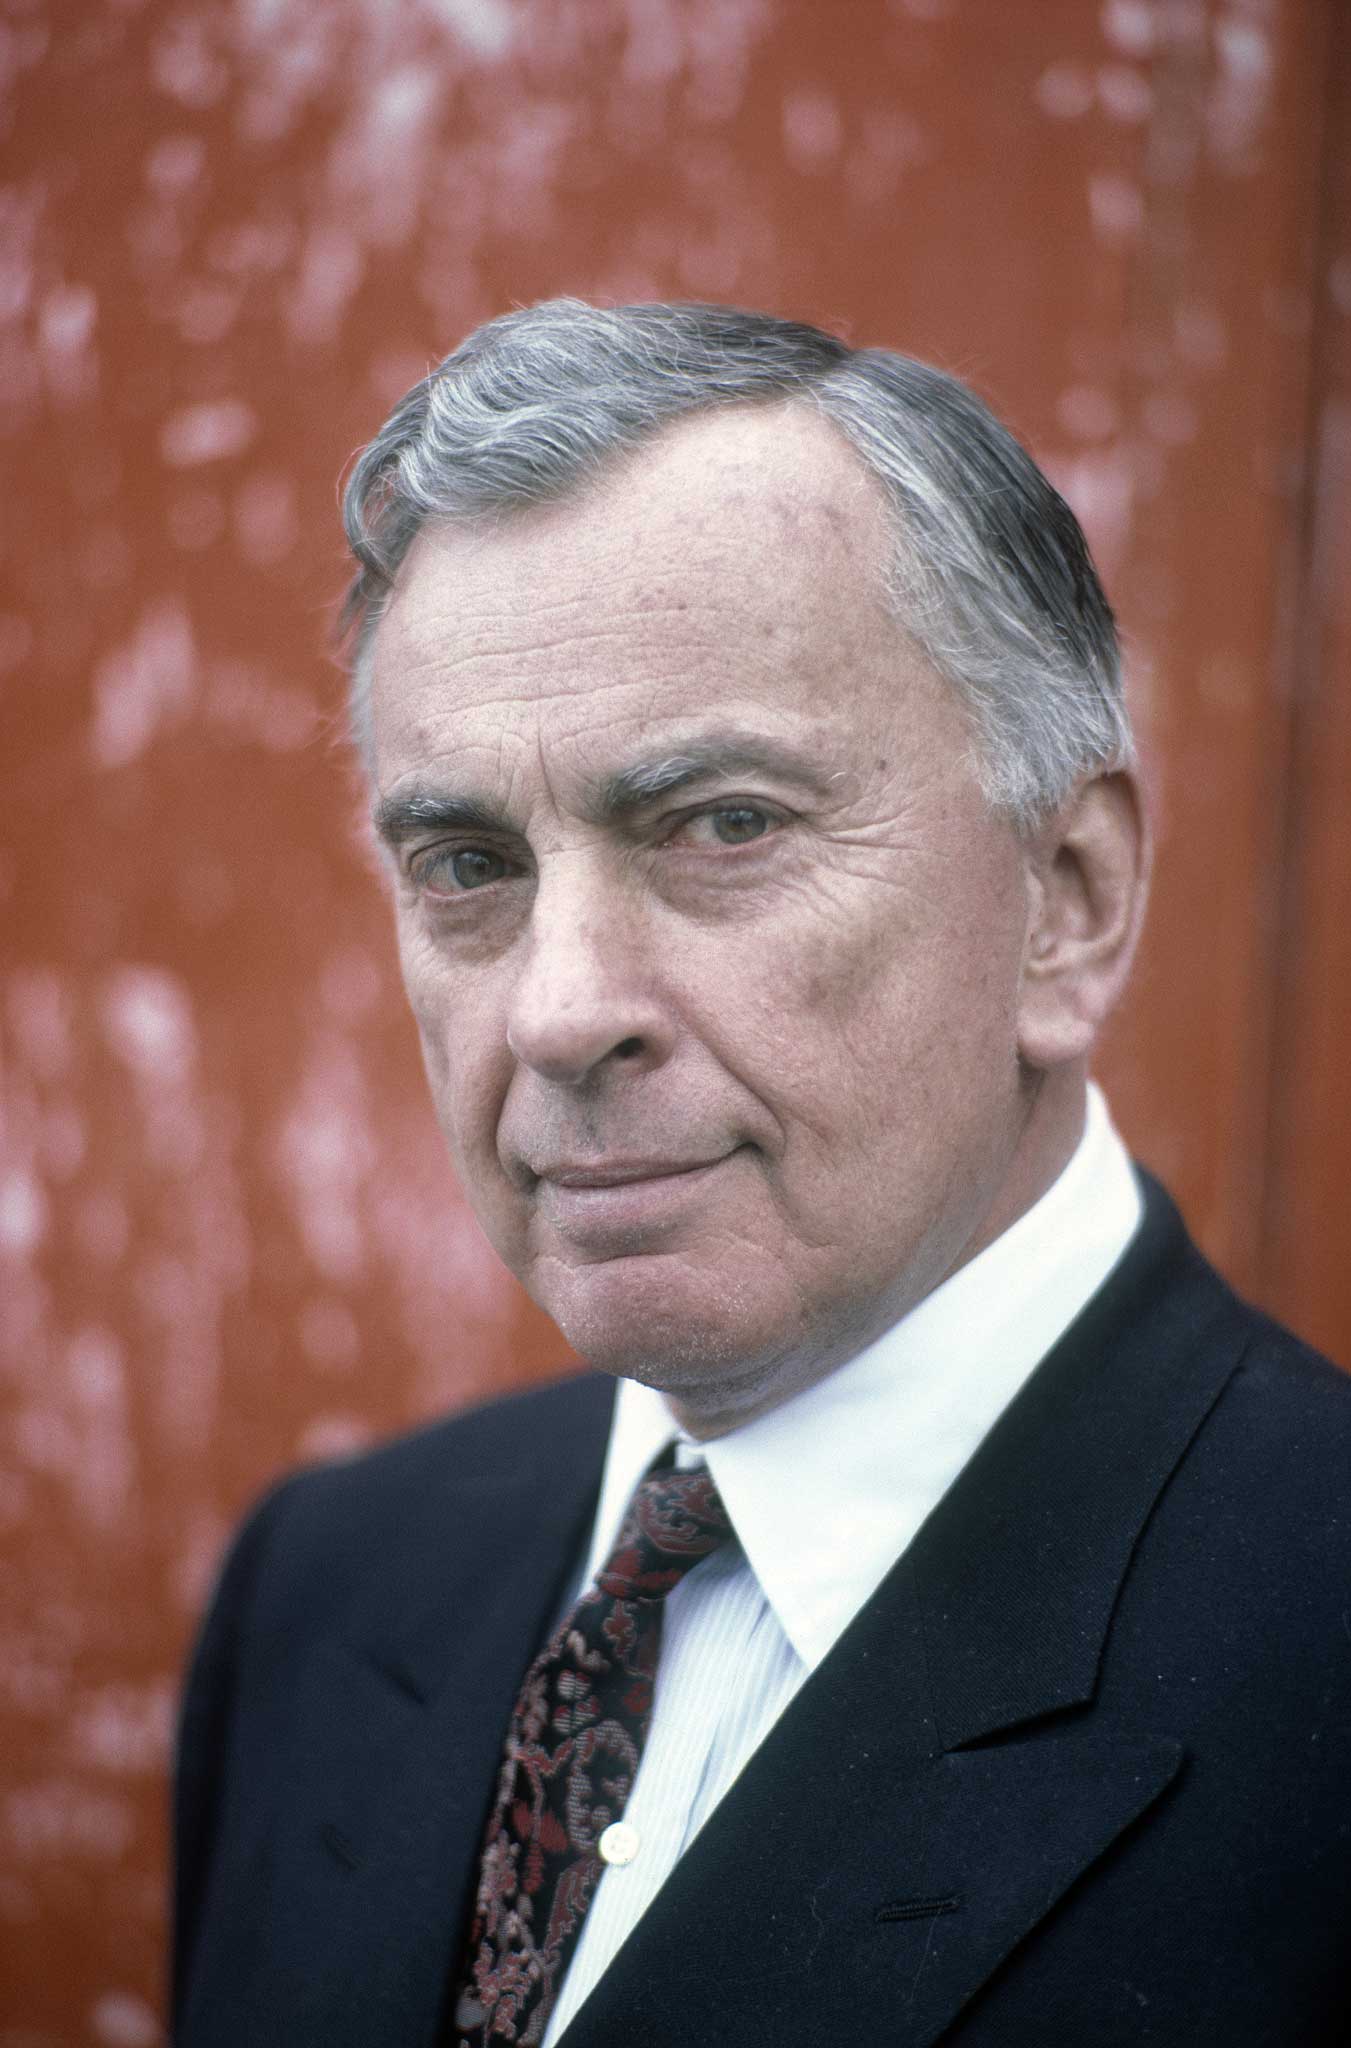 Lincoln by Gore Vidal